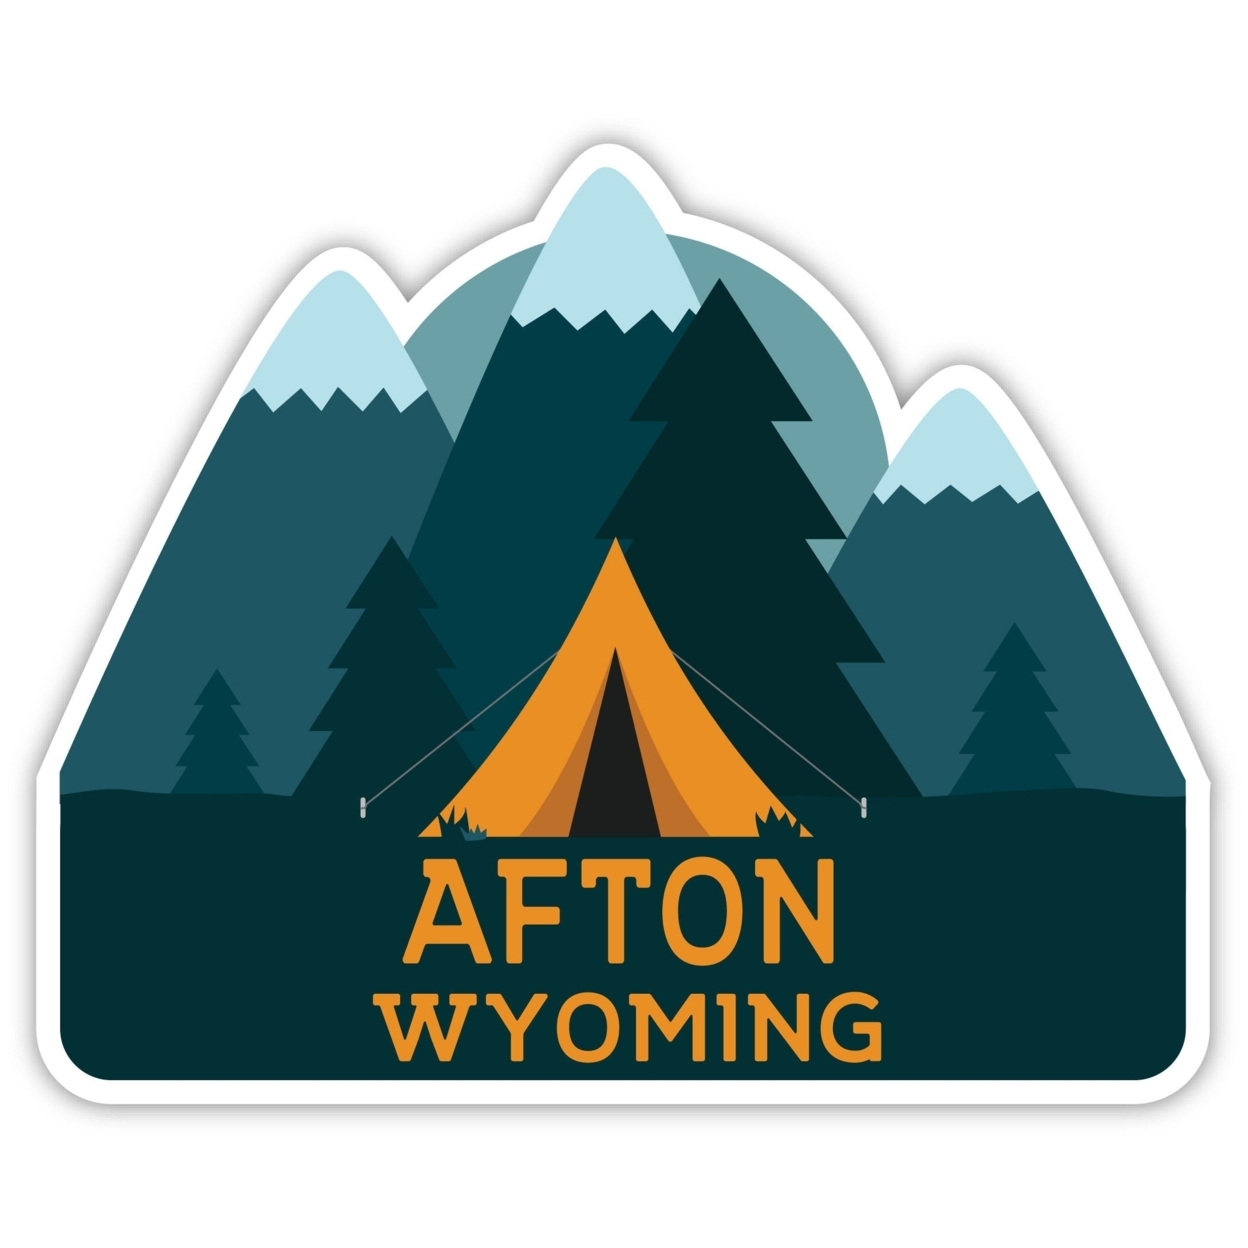 Afton Wyoming Souvenir Decorative Stickers (Choose Theme And Size) - Single Unit, 12-Inch, Tent